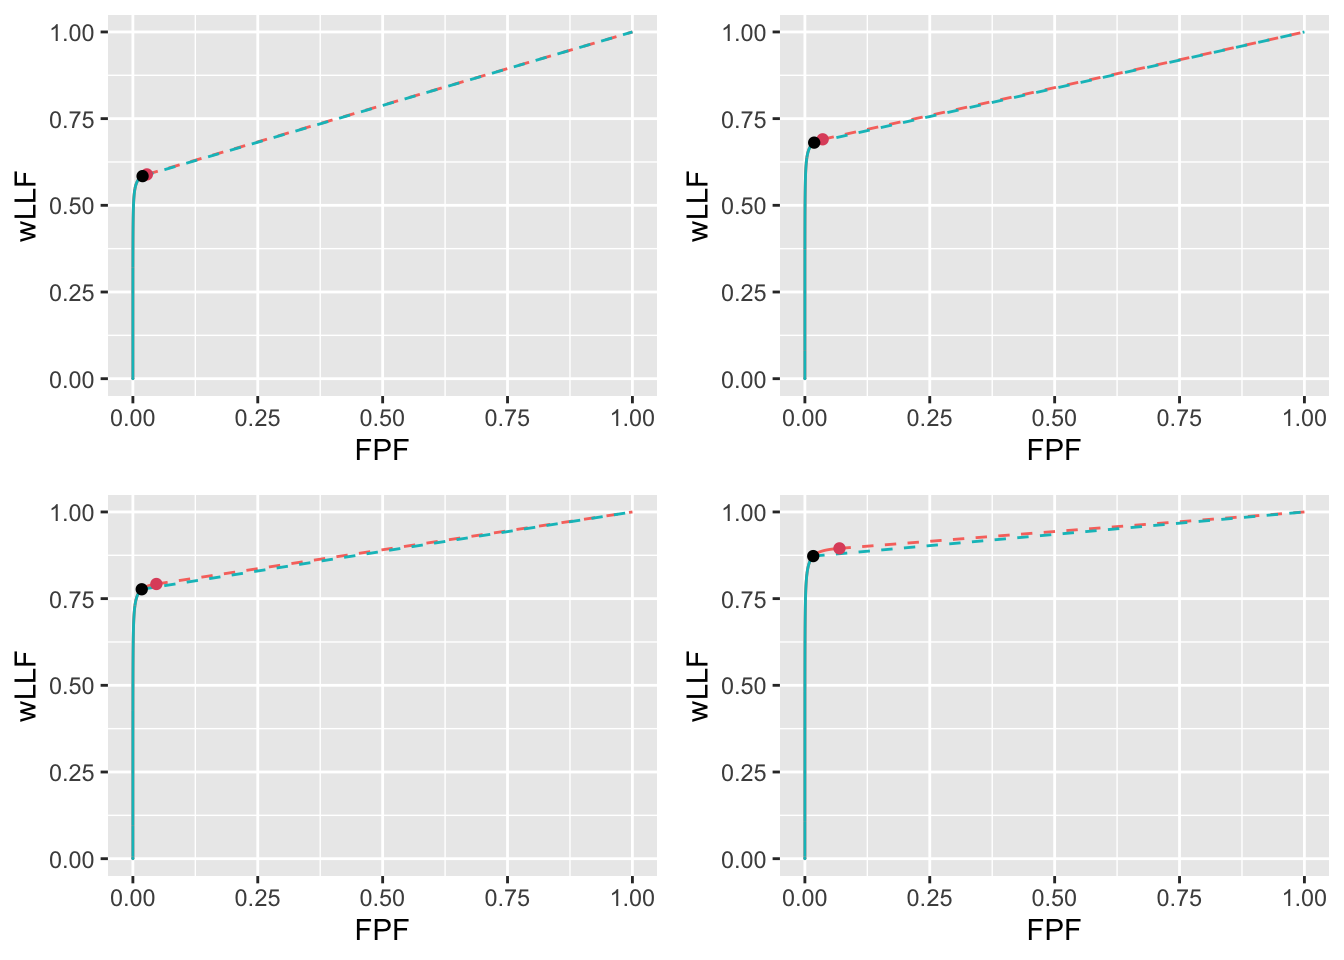 High performance varying $\nu$ wAFROC plots for the two optimization methods with superimposed operating points. The color coding is as in previous figures. The values of $\nu$ are: top-left $\nu = 0.6$, top-right $\nu = 0.7$, bottom-left $\nu = 0.8$ and bottom-right $\nu = 0.9$.